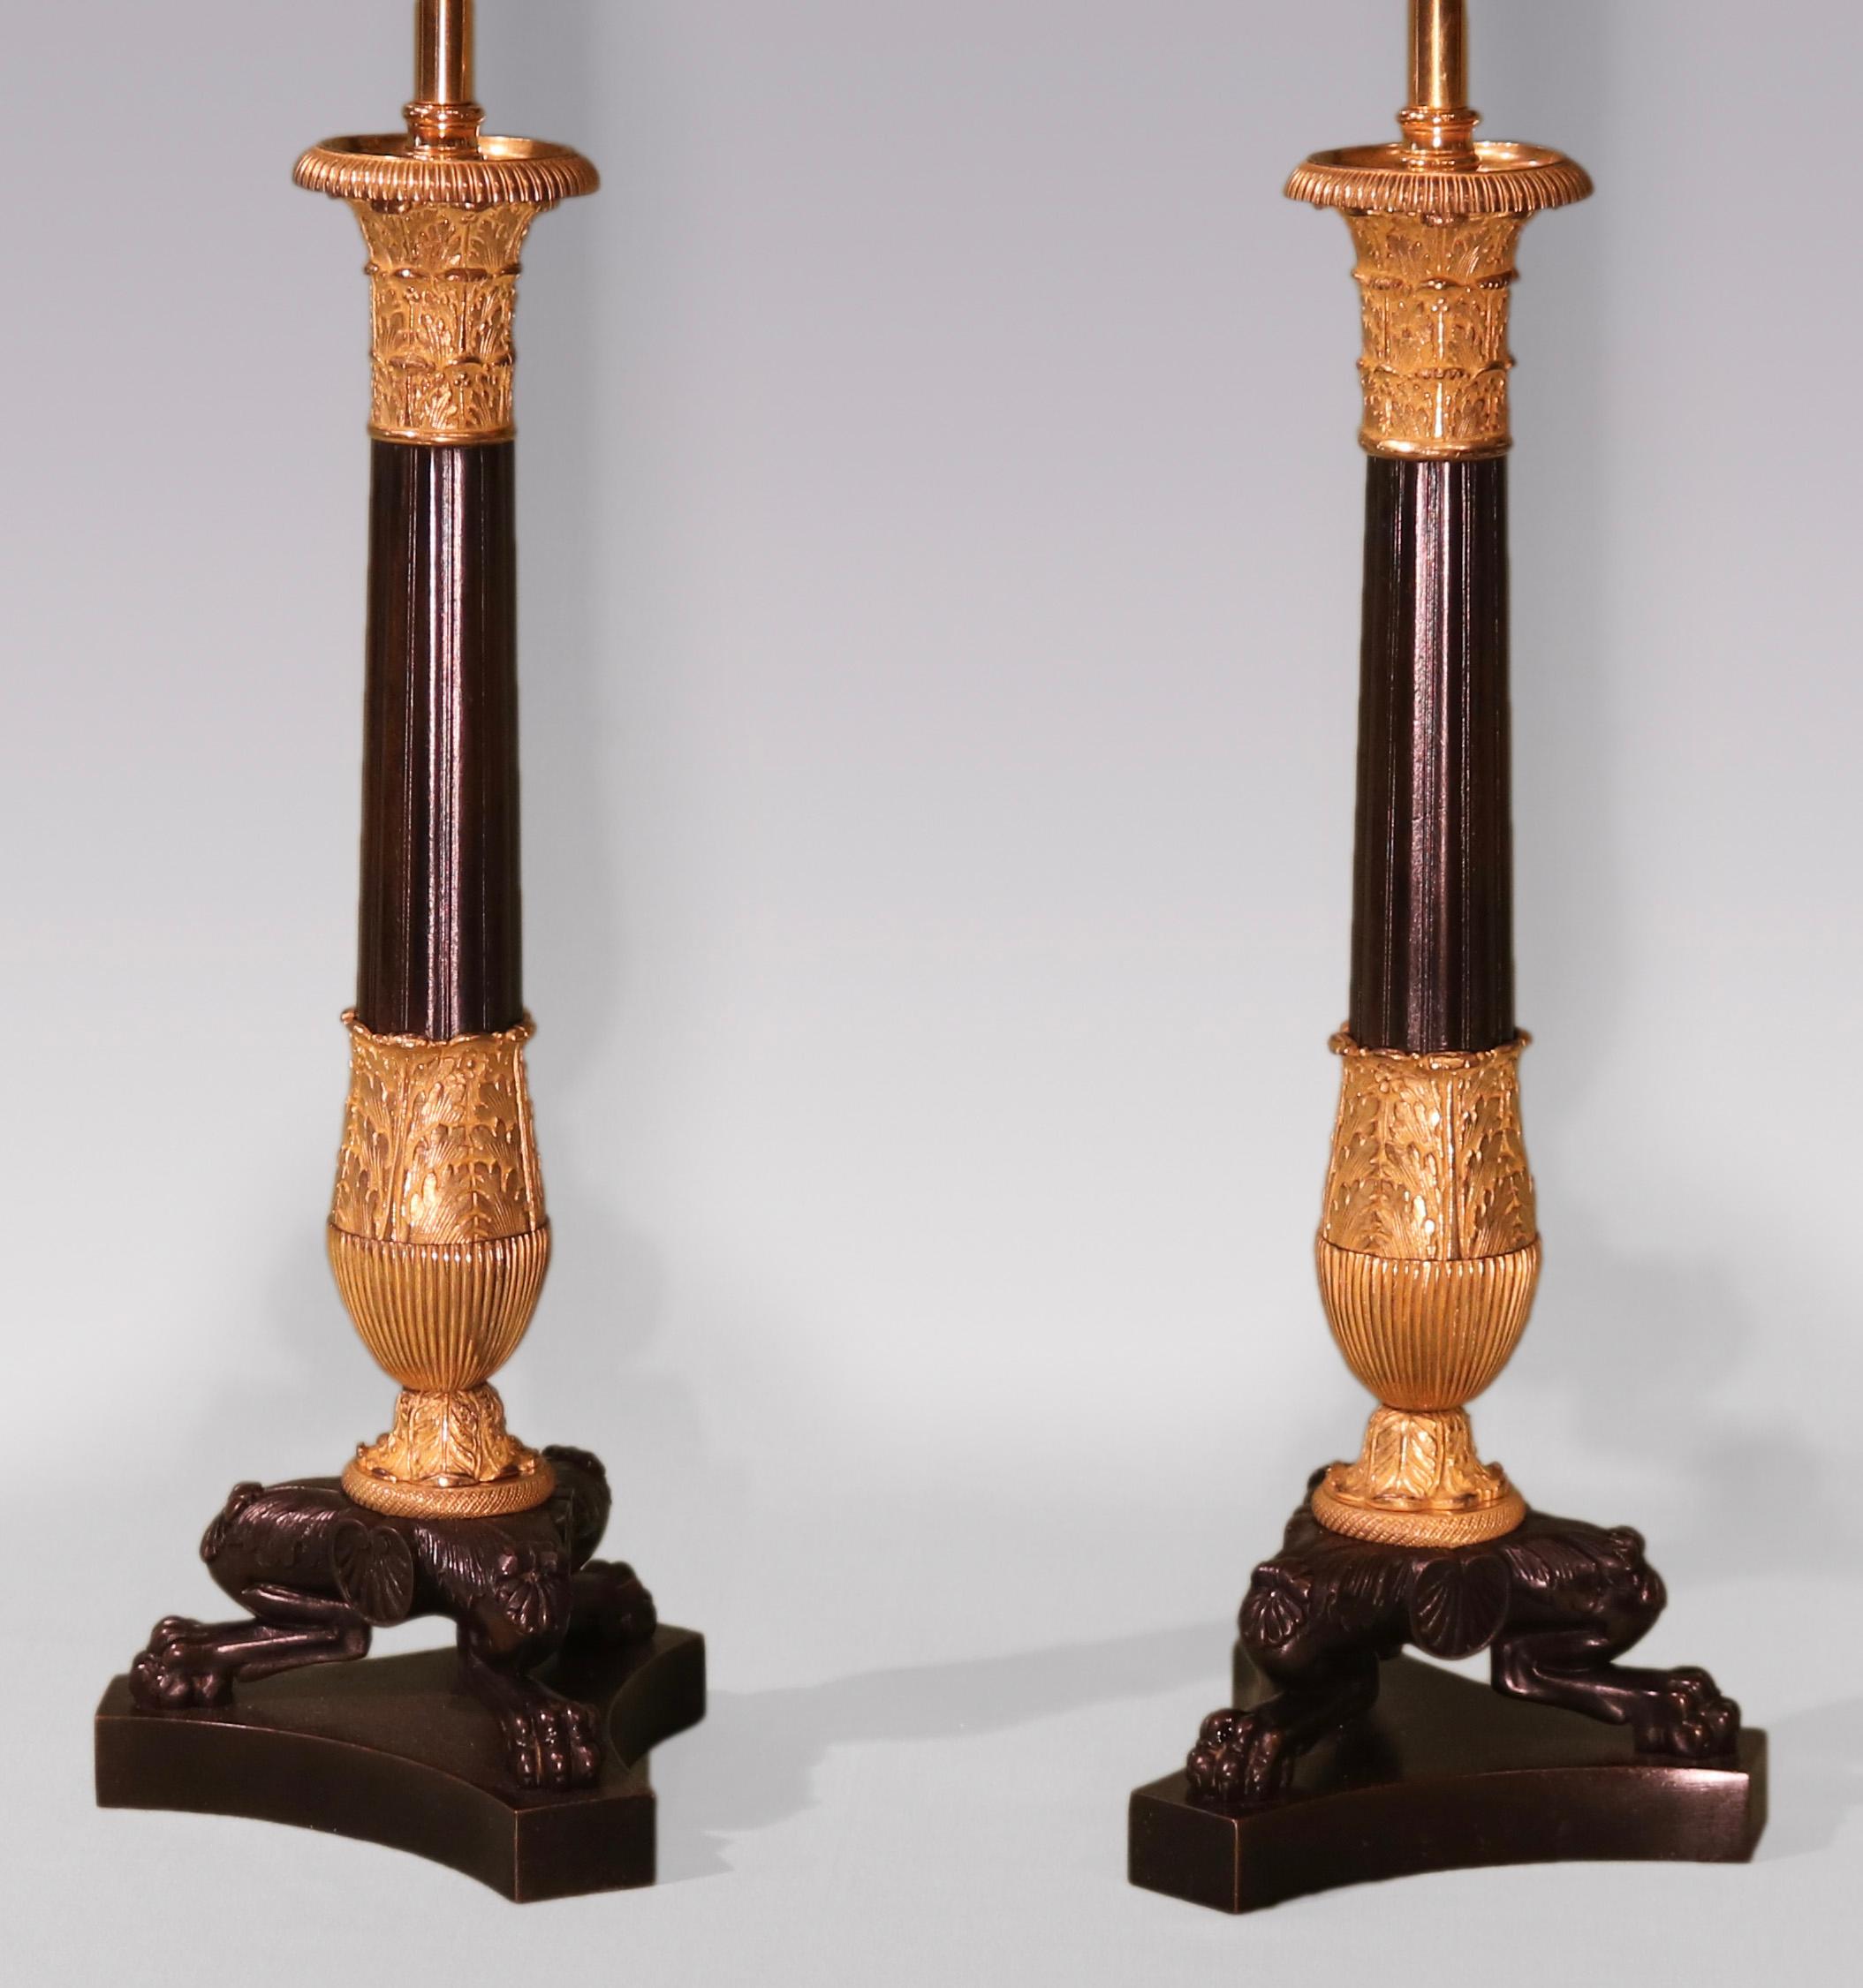 A large pair of early 19th century bronze & ormolu Candlesticks having “Corinthian Column” sconces above fluted stems with acanthus & reeded detail, supported on lion’ paw feet centred by scrolled medallions ending on triform platform bases.